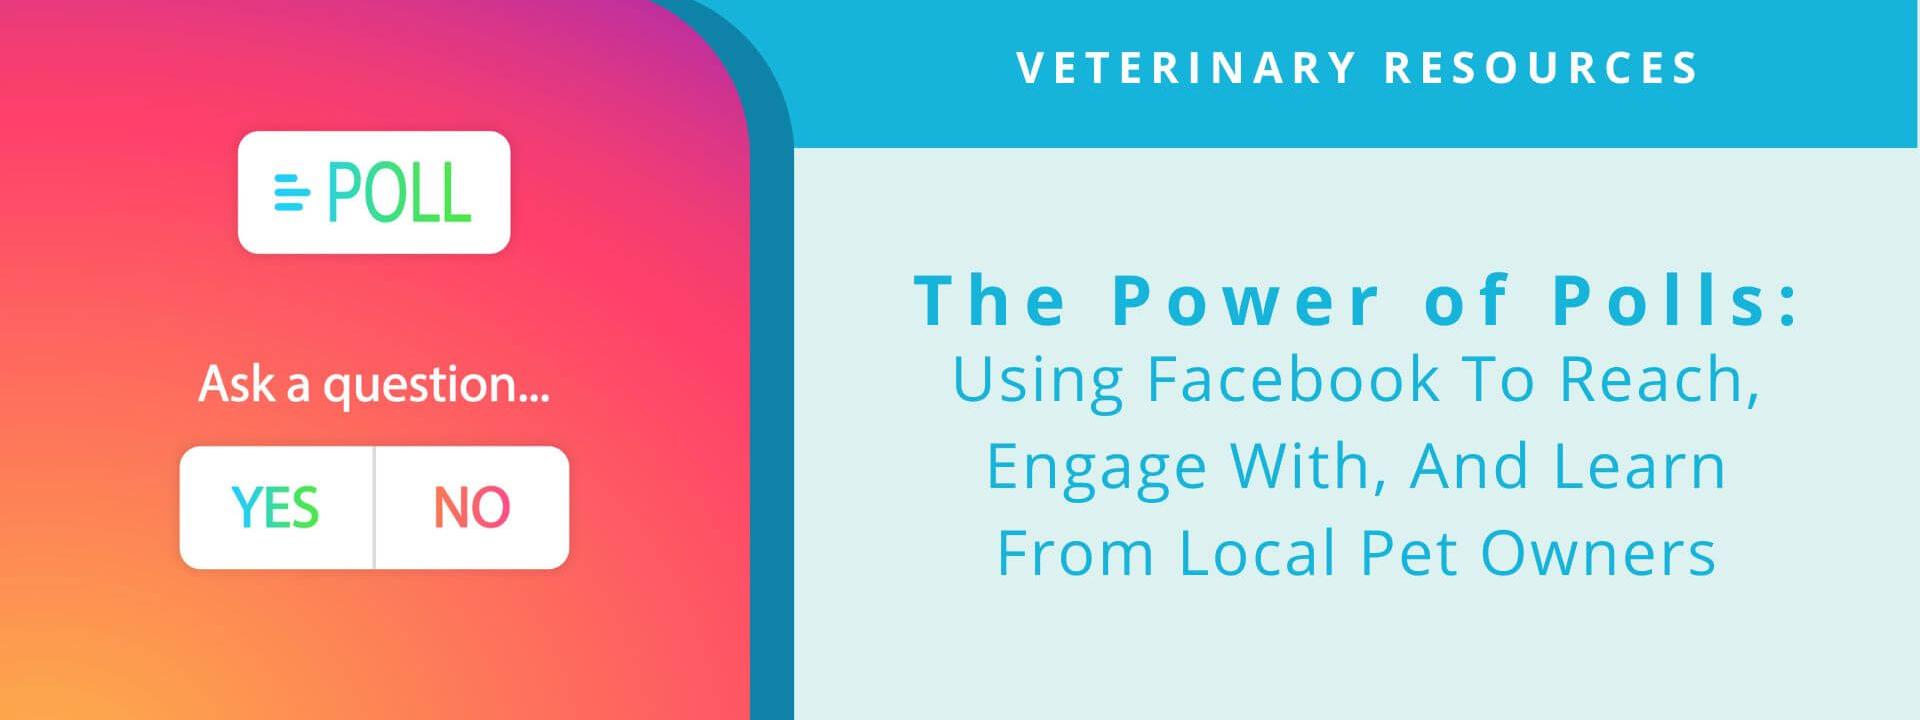 The Power Of Polls: Using Facebook To Reach, Engage With, And Learn From Local Pet Owners